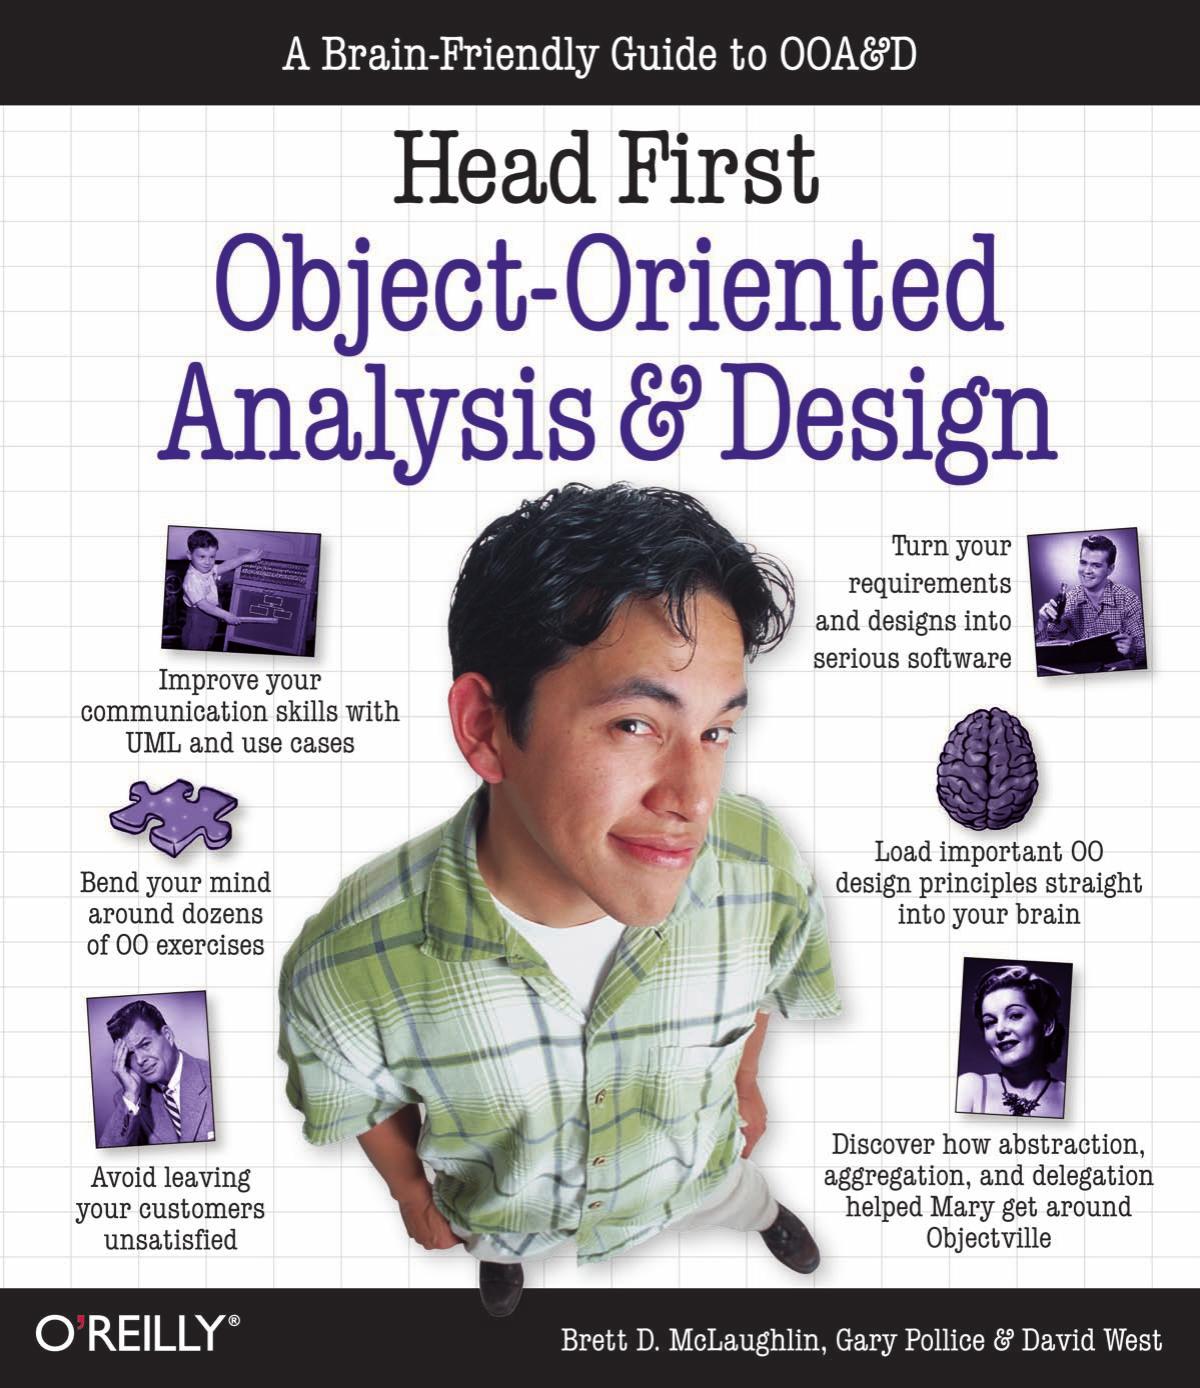 Head First Object-Oriented Analysis & Design